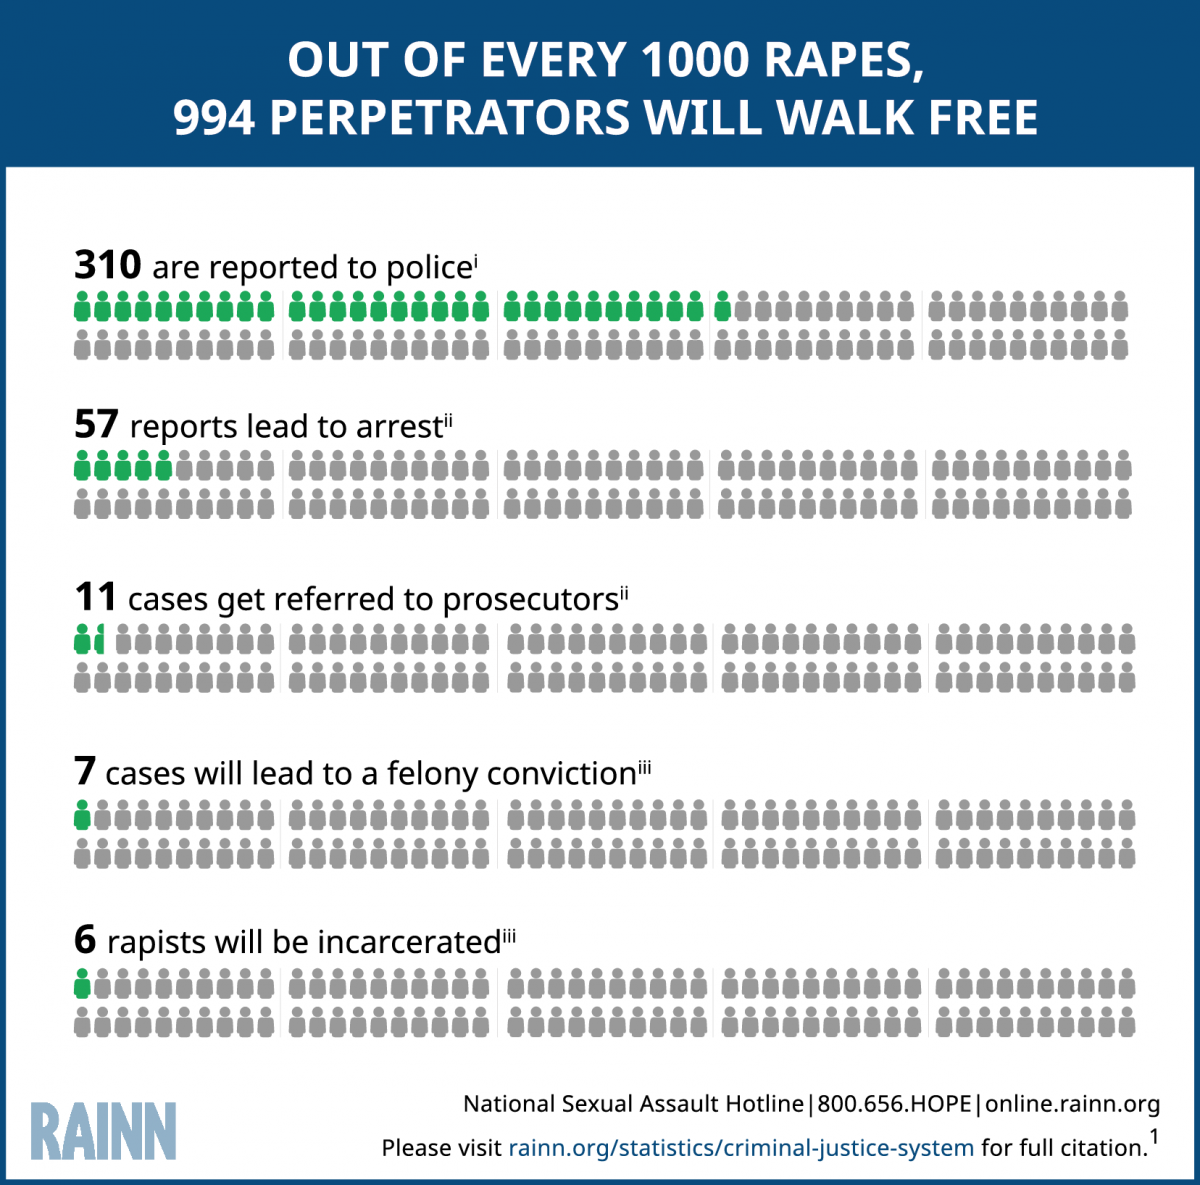 Graphic demonstrating that out of 1000 rapes, 994 perpetrators will walk free. Out of every 1,000 rapes, 310 are reported to the police, 57 reports lead to arrest, 13 cases get referred to prosecutors, 7 cases will lead to a felony conviction, 6 rapists will be incarcerated.